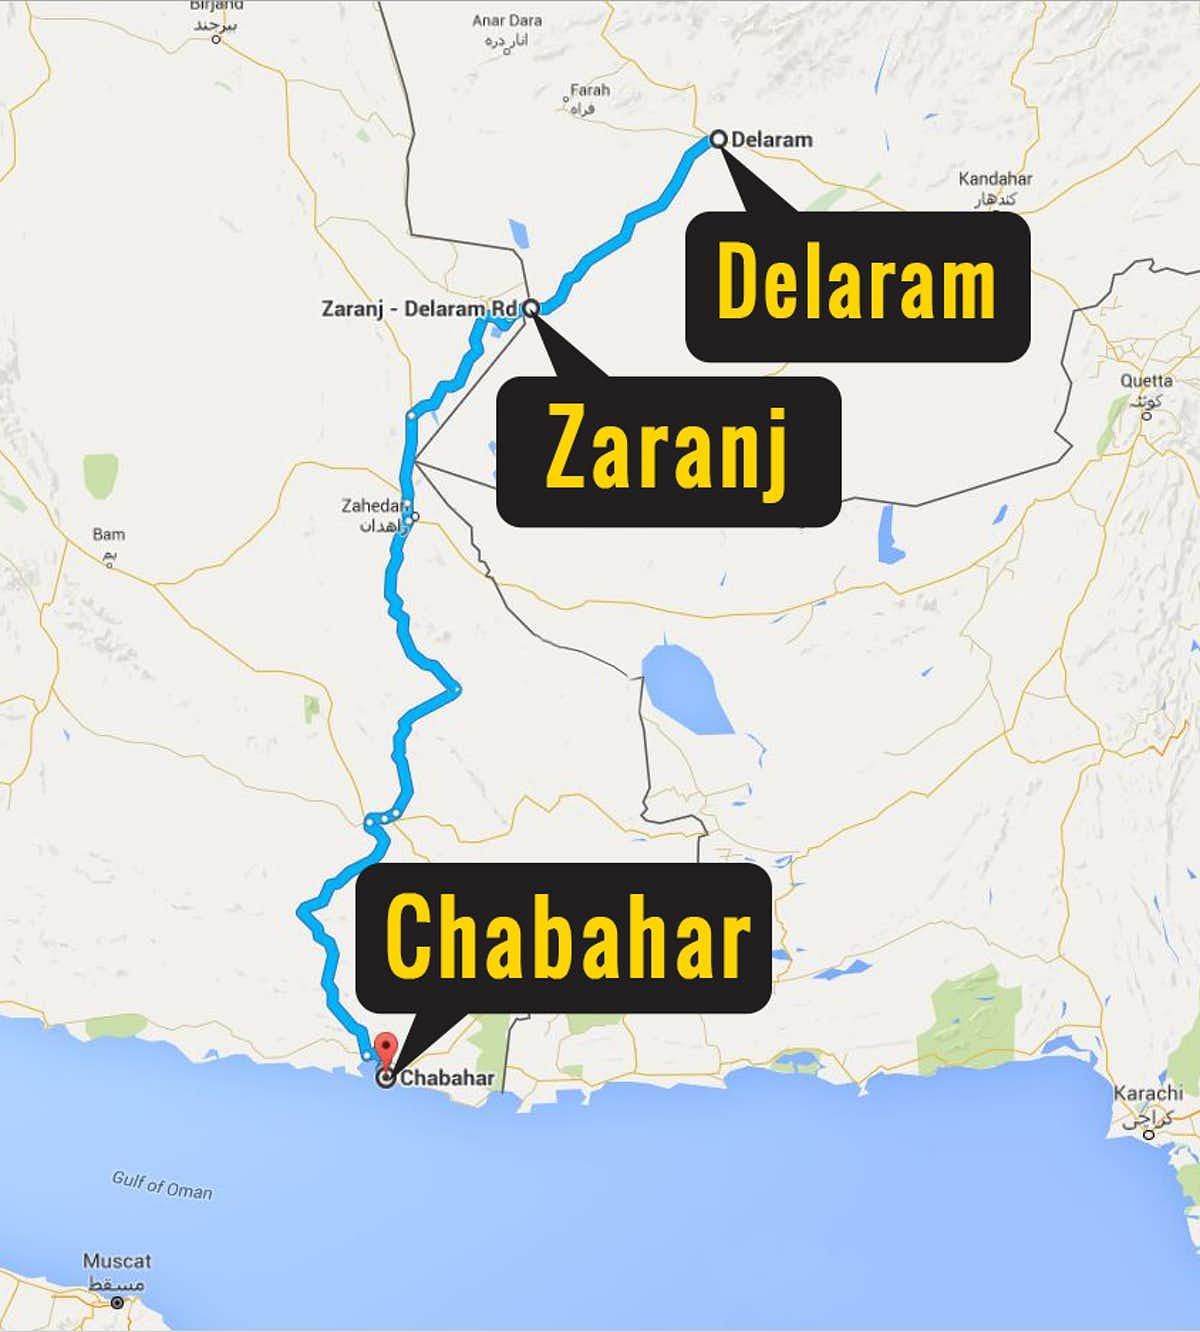 Chabahar, in time, could be an alternative port for India’s re-export market to the Middle East and North Africa.